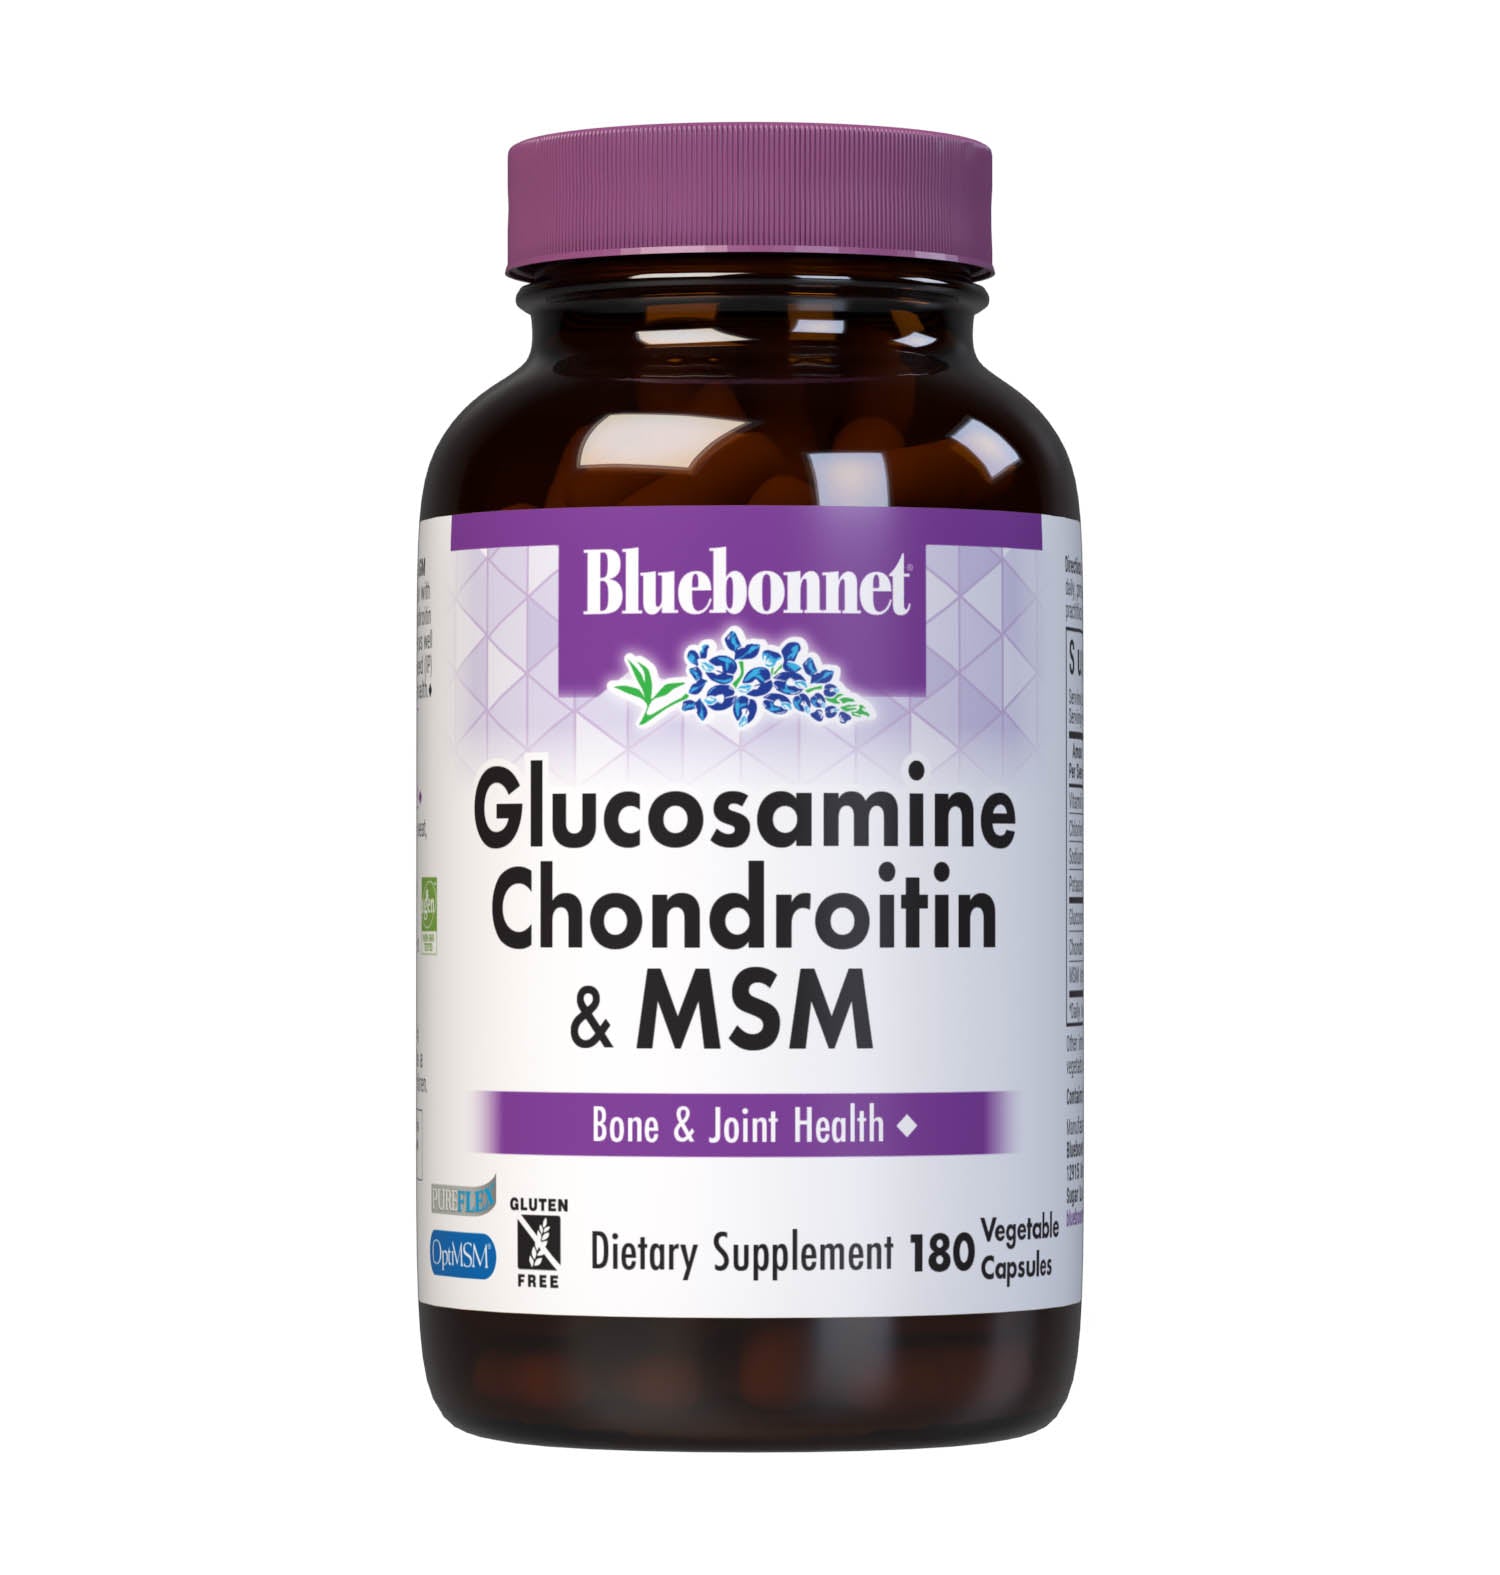 Bluebonnet’s Glucosamine Chondroitin Sulfate & MSM 180 Vegetable Capsules are specially formulated with a combination of glucosamine sulfate, chondroitin sulfate, OptiMSM an active form of sulfur, as well as vitamin C from Identity-Preserved (IP) L-ascorbic acid for optimal joint health. #size_180 count